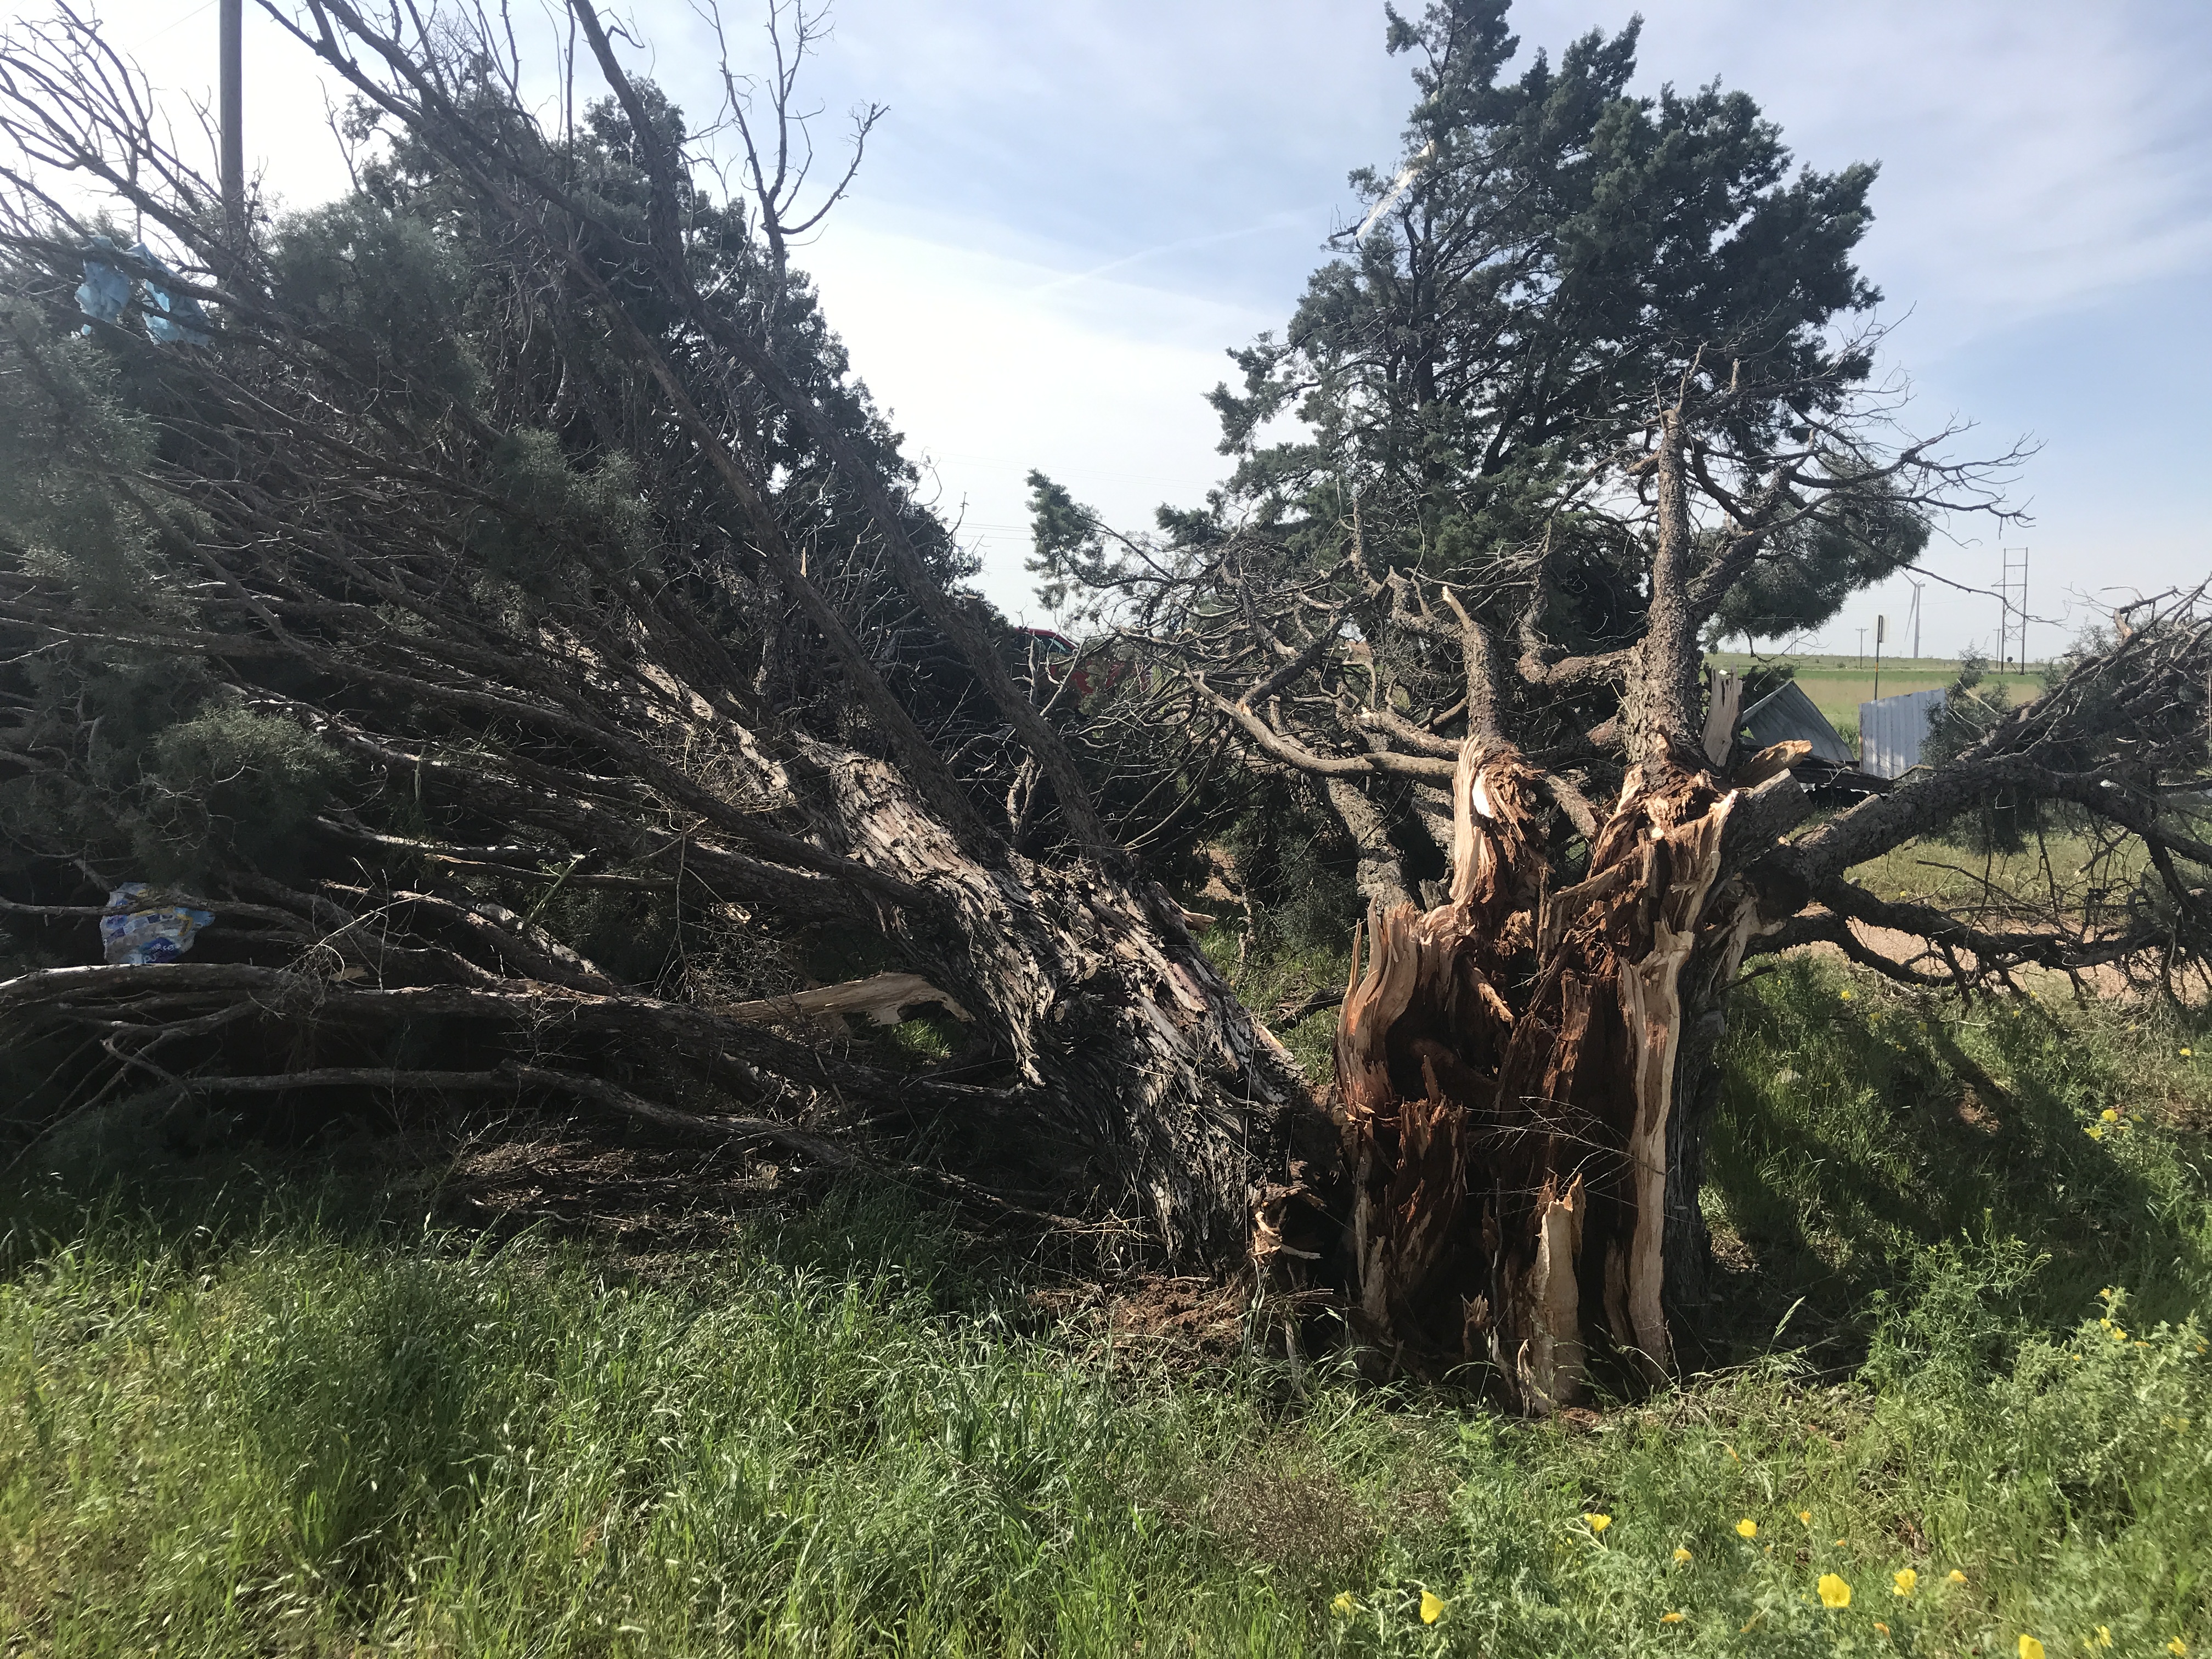 Photo of damage sustained from a tornado that tracked north and east of Tahoka on 5 May 2019.